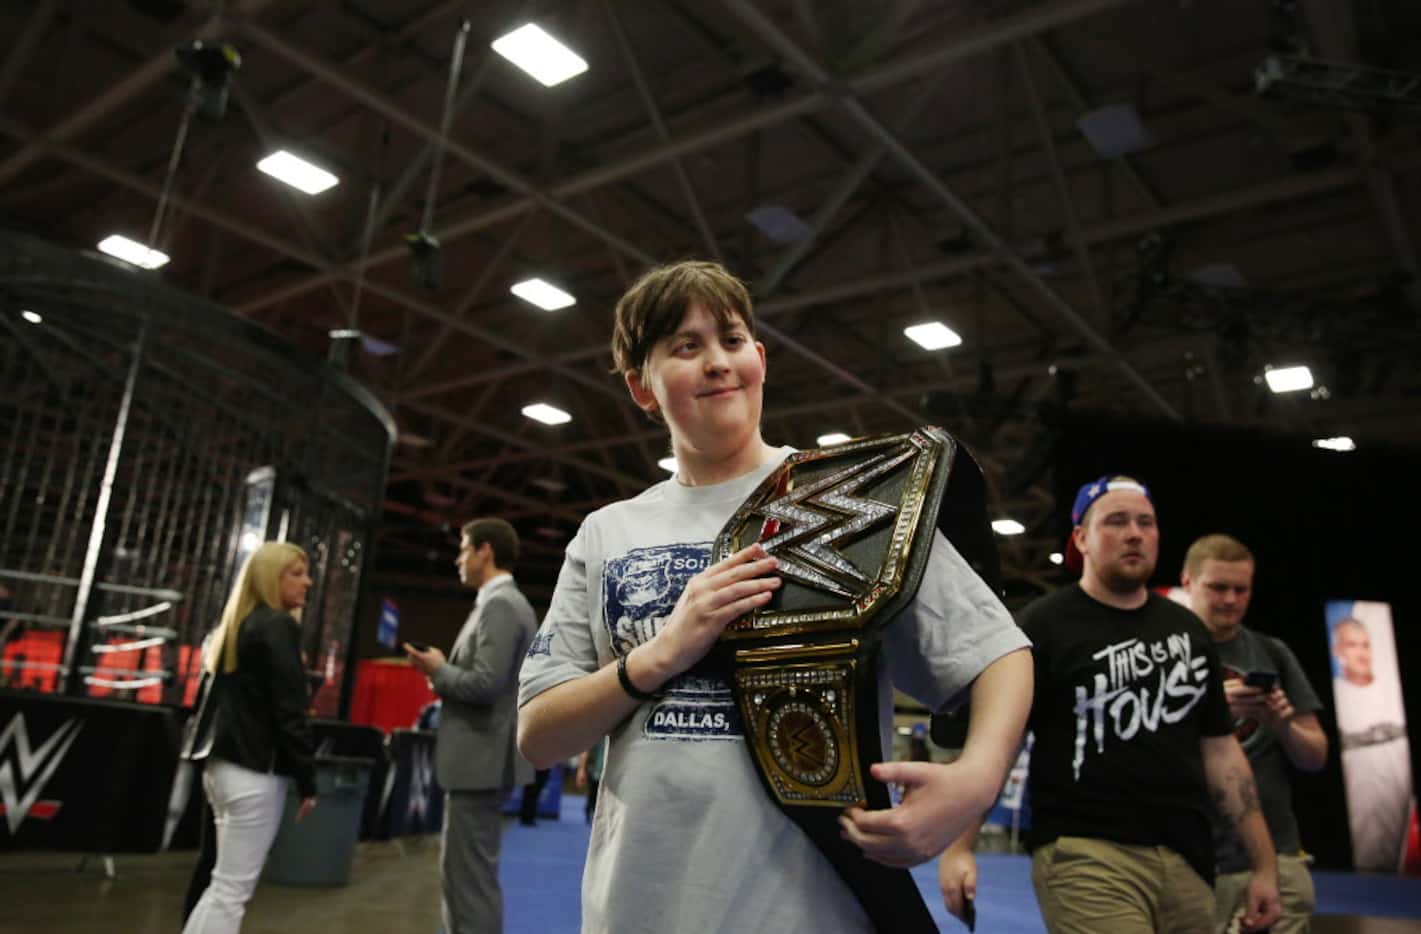 Jordon Vaughan, 17, of Albuquerque, New Mexico, is all smiles while walking with his...